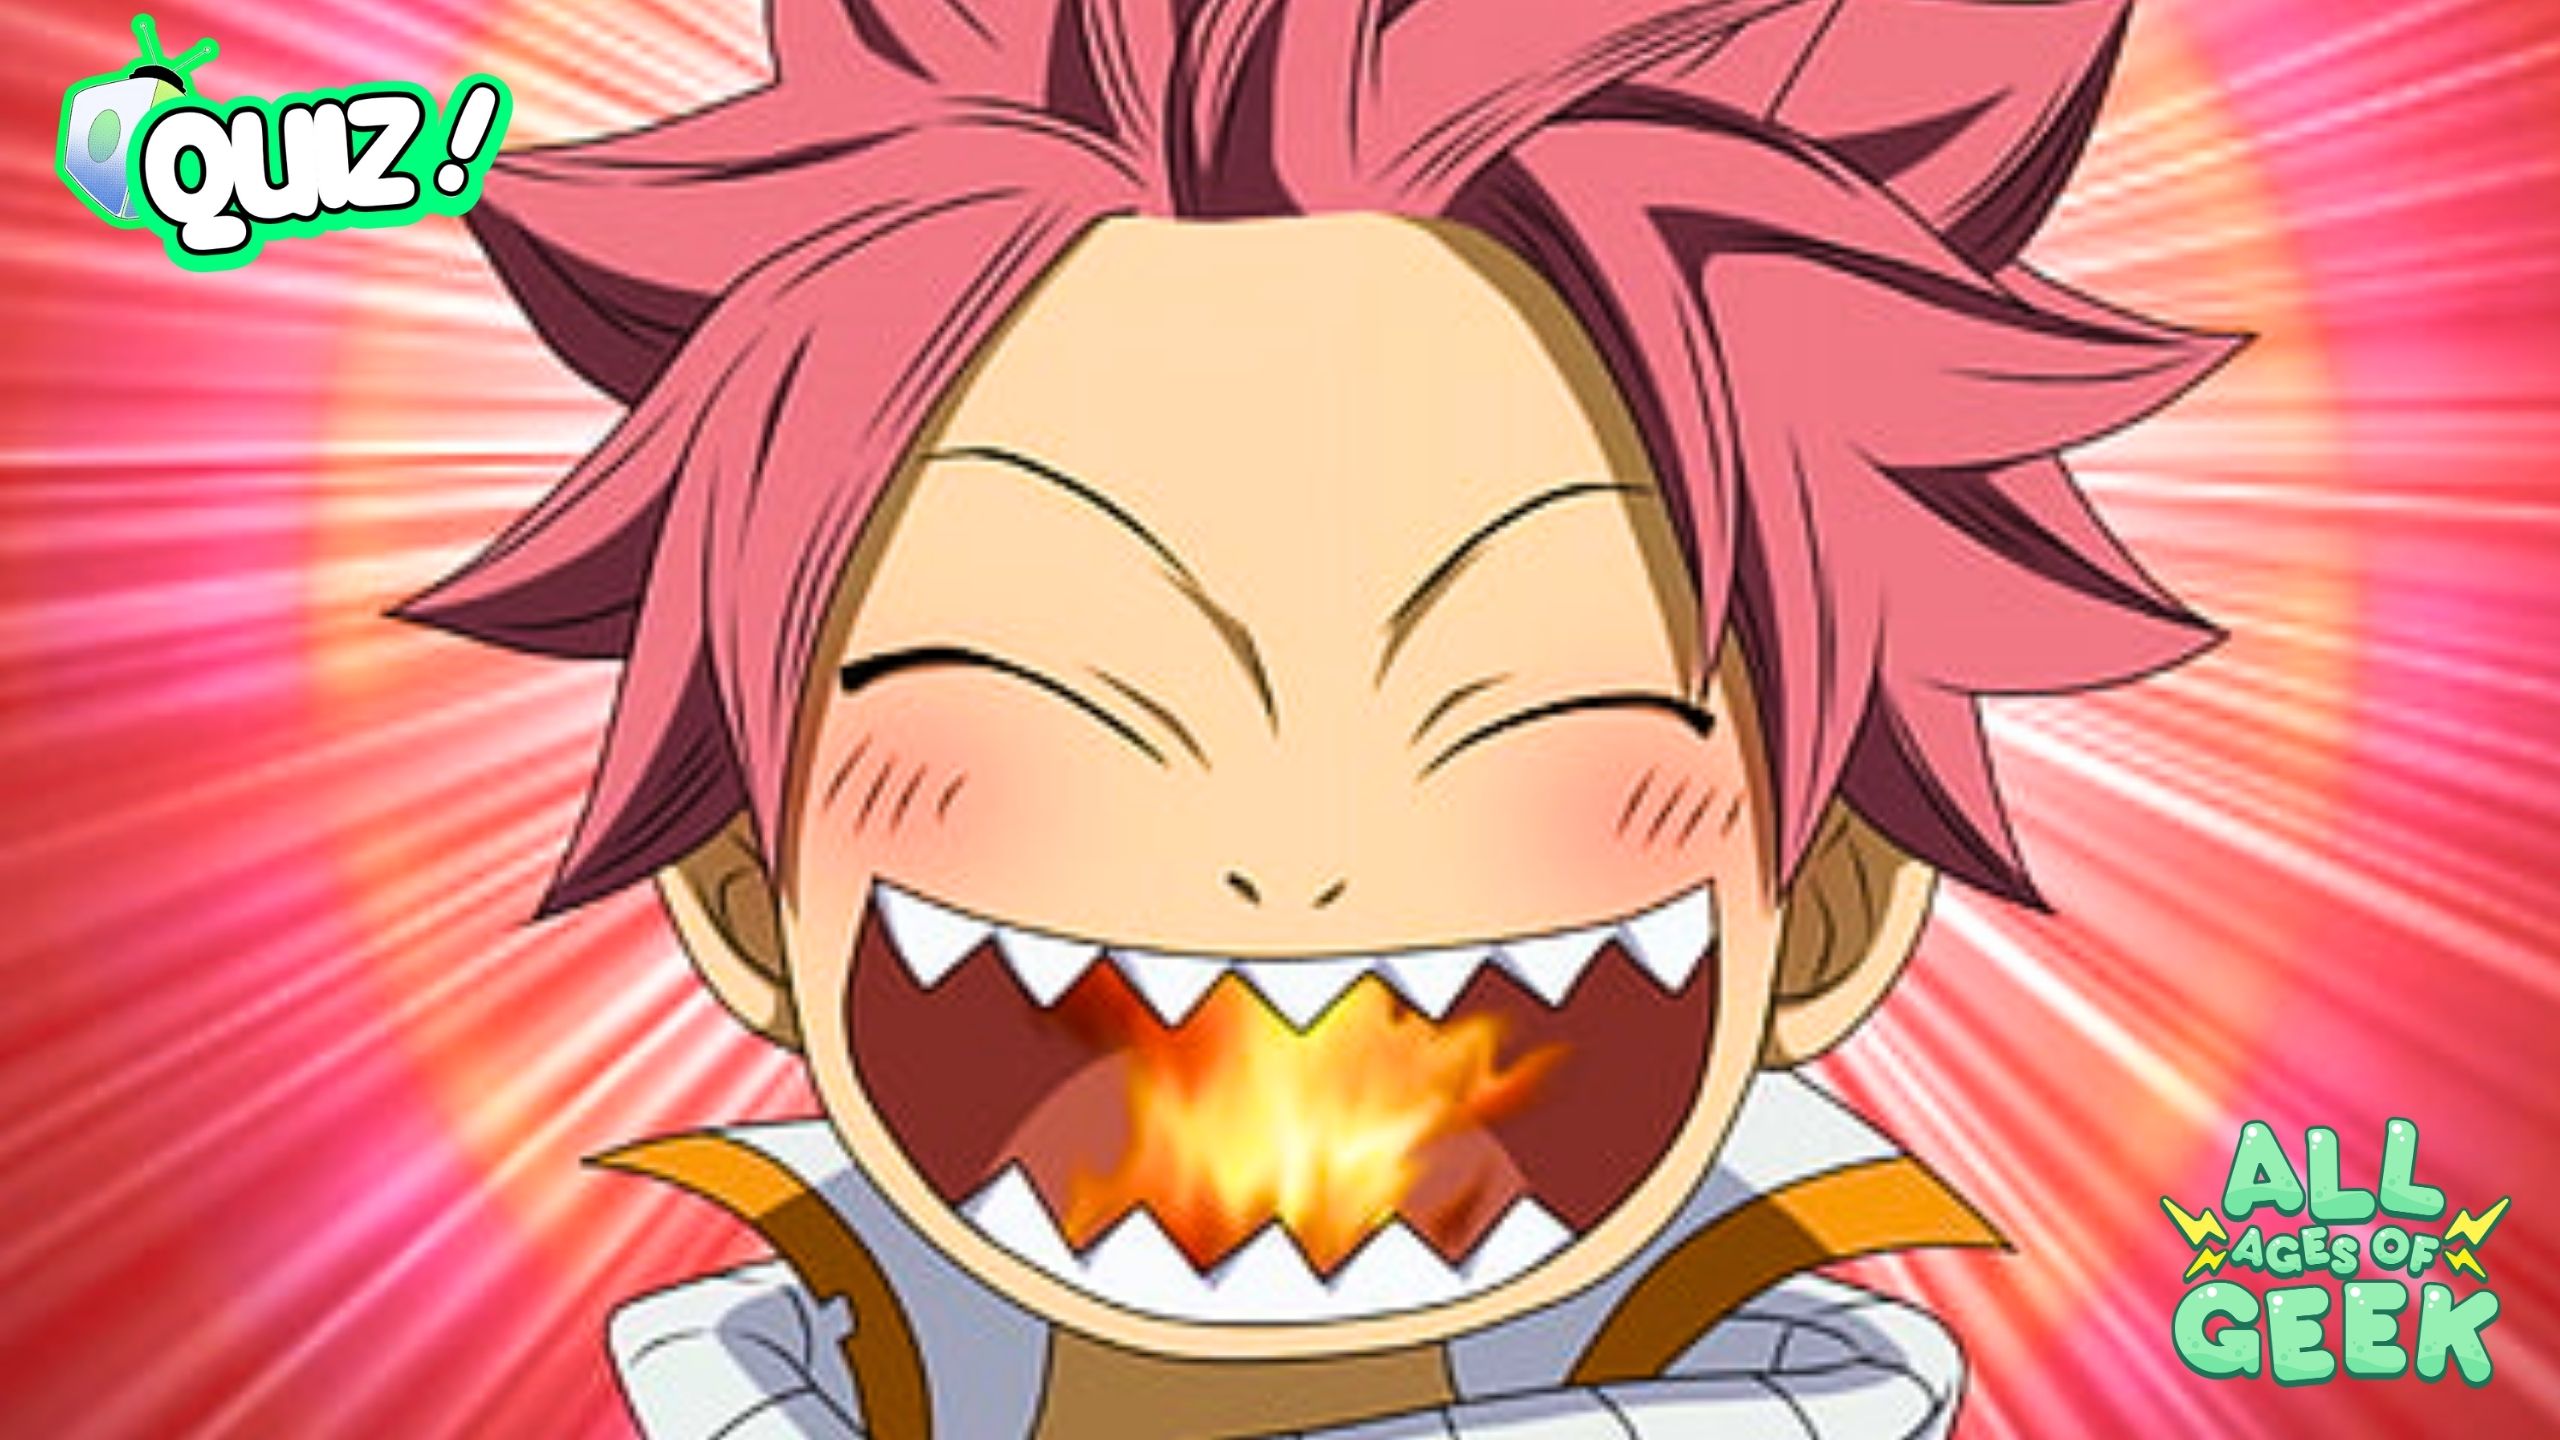 Take the “How Well Do You Know Natsu Dragneel?” Quiz!